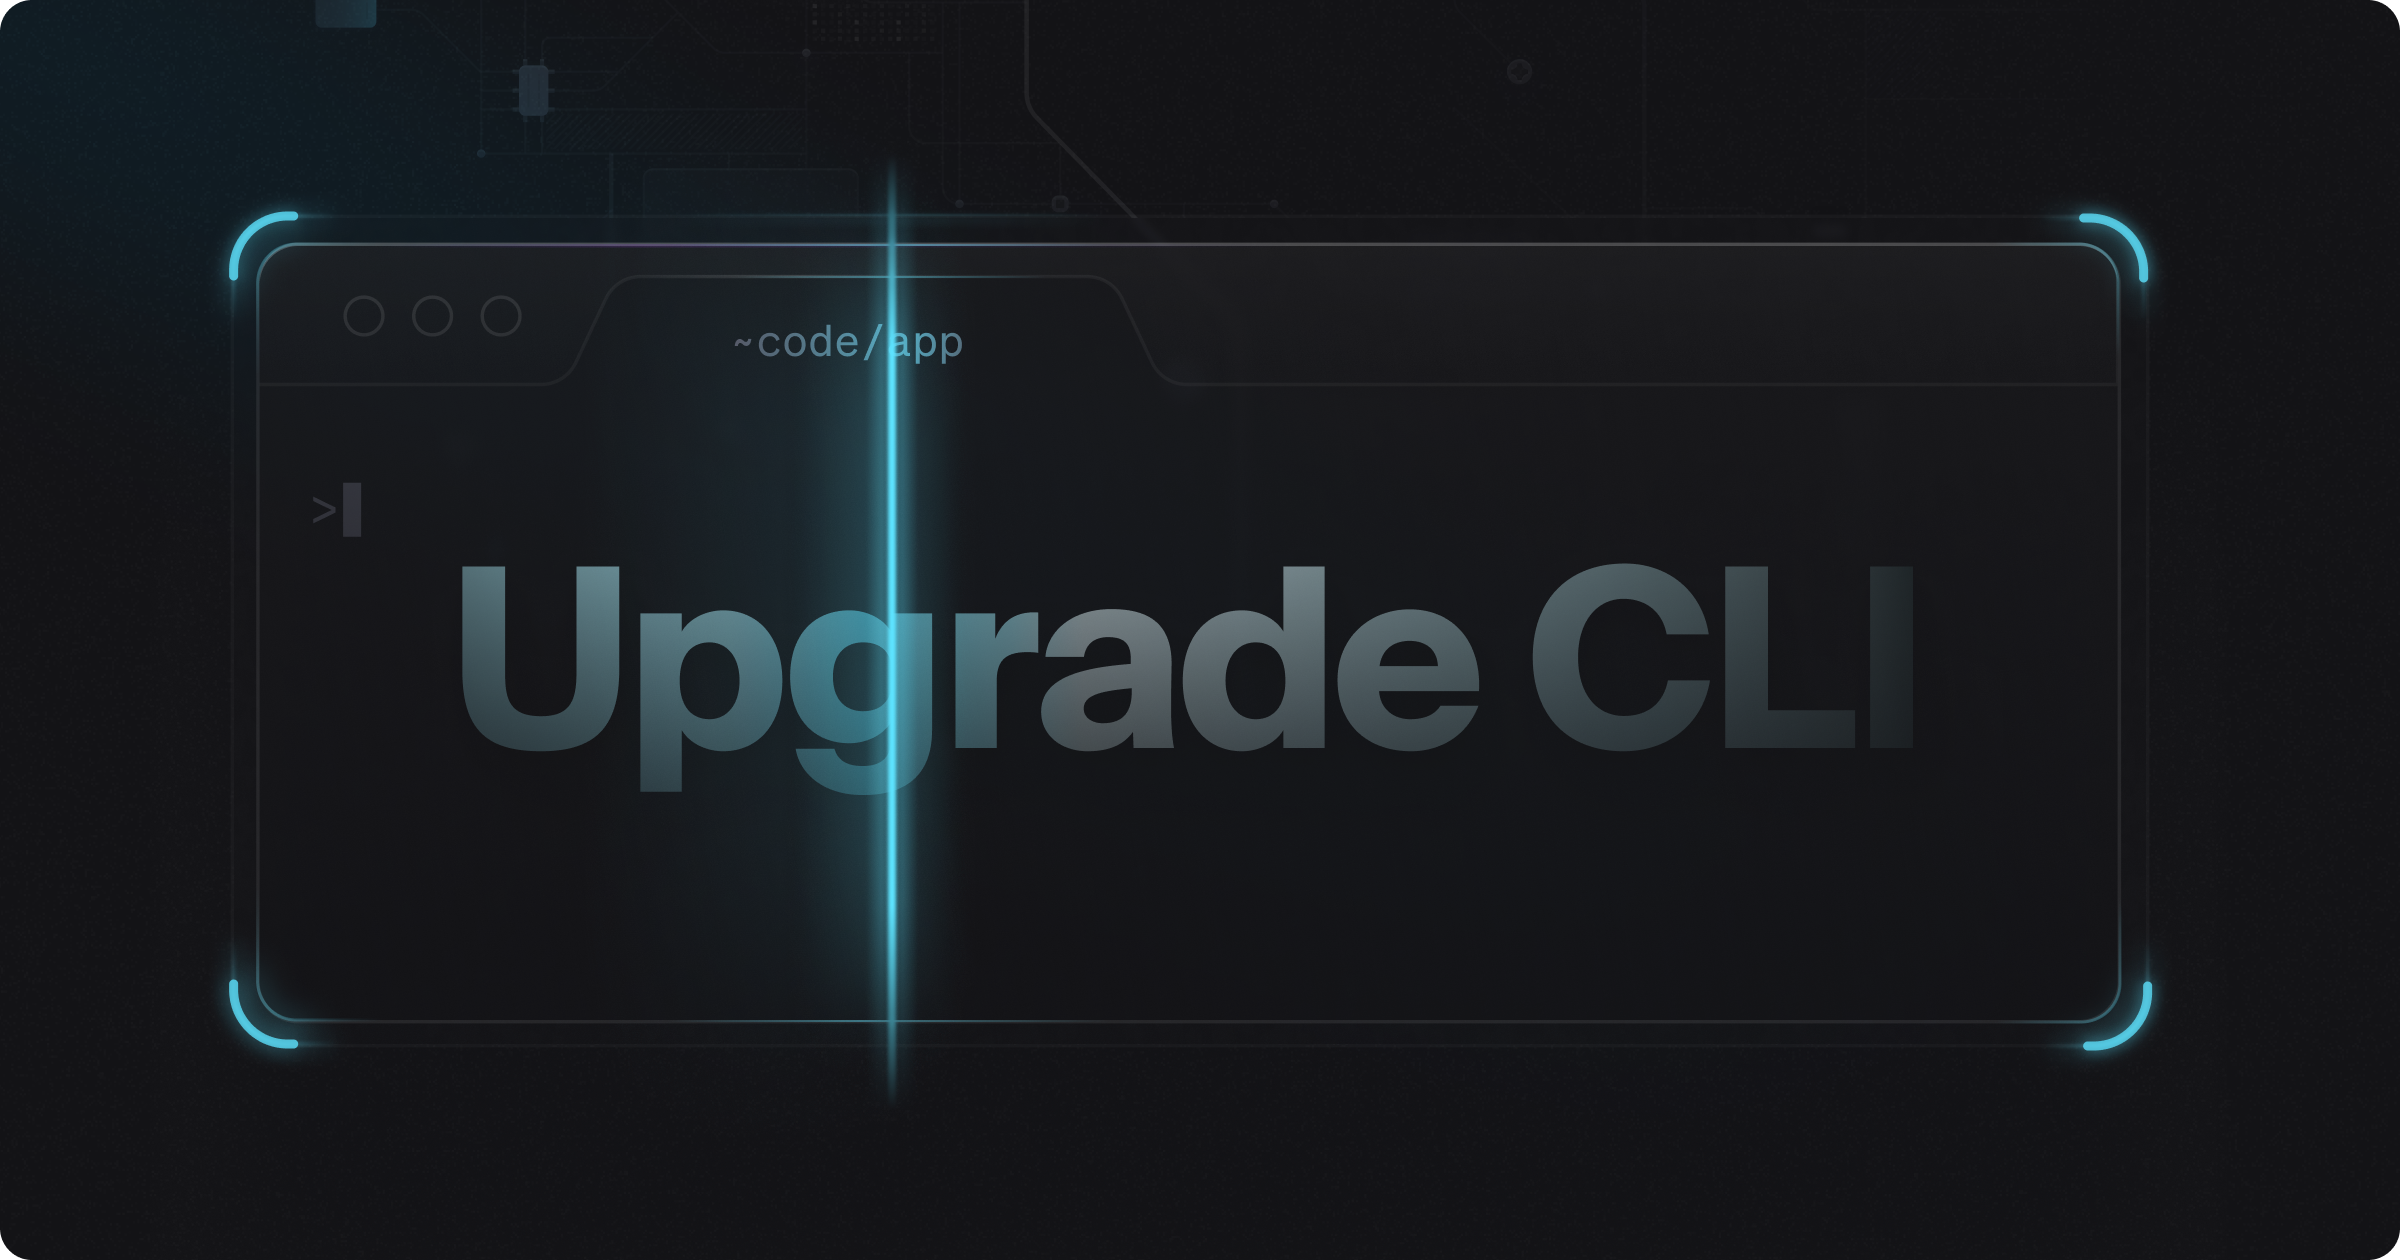 Illustration of a CLI with a big text in the middle saysing "Upgrade CLI"